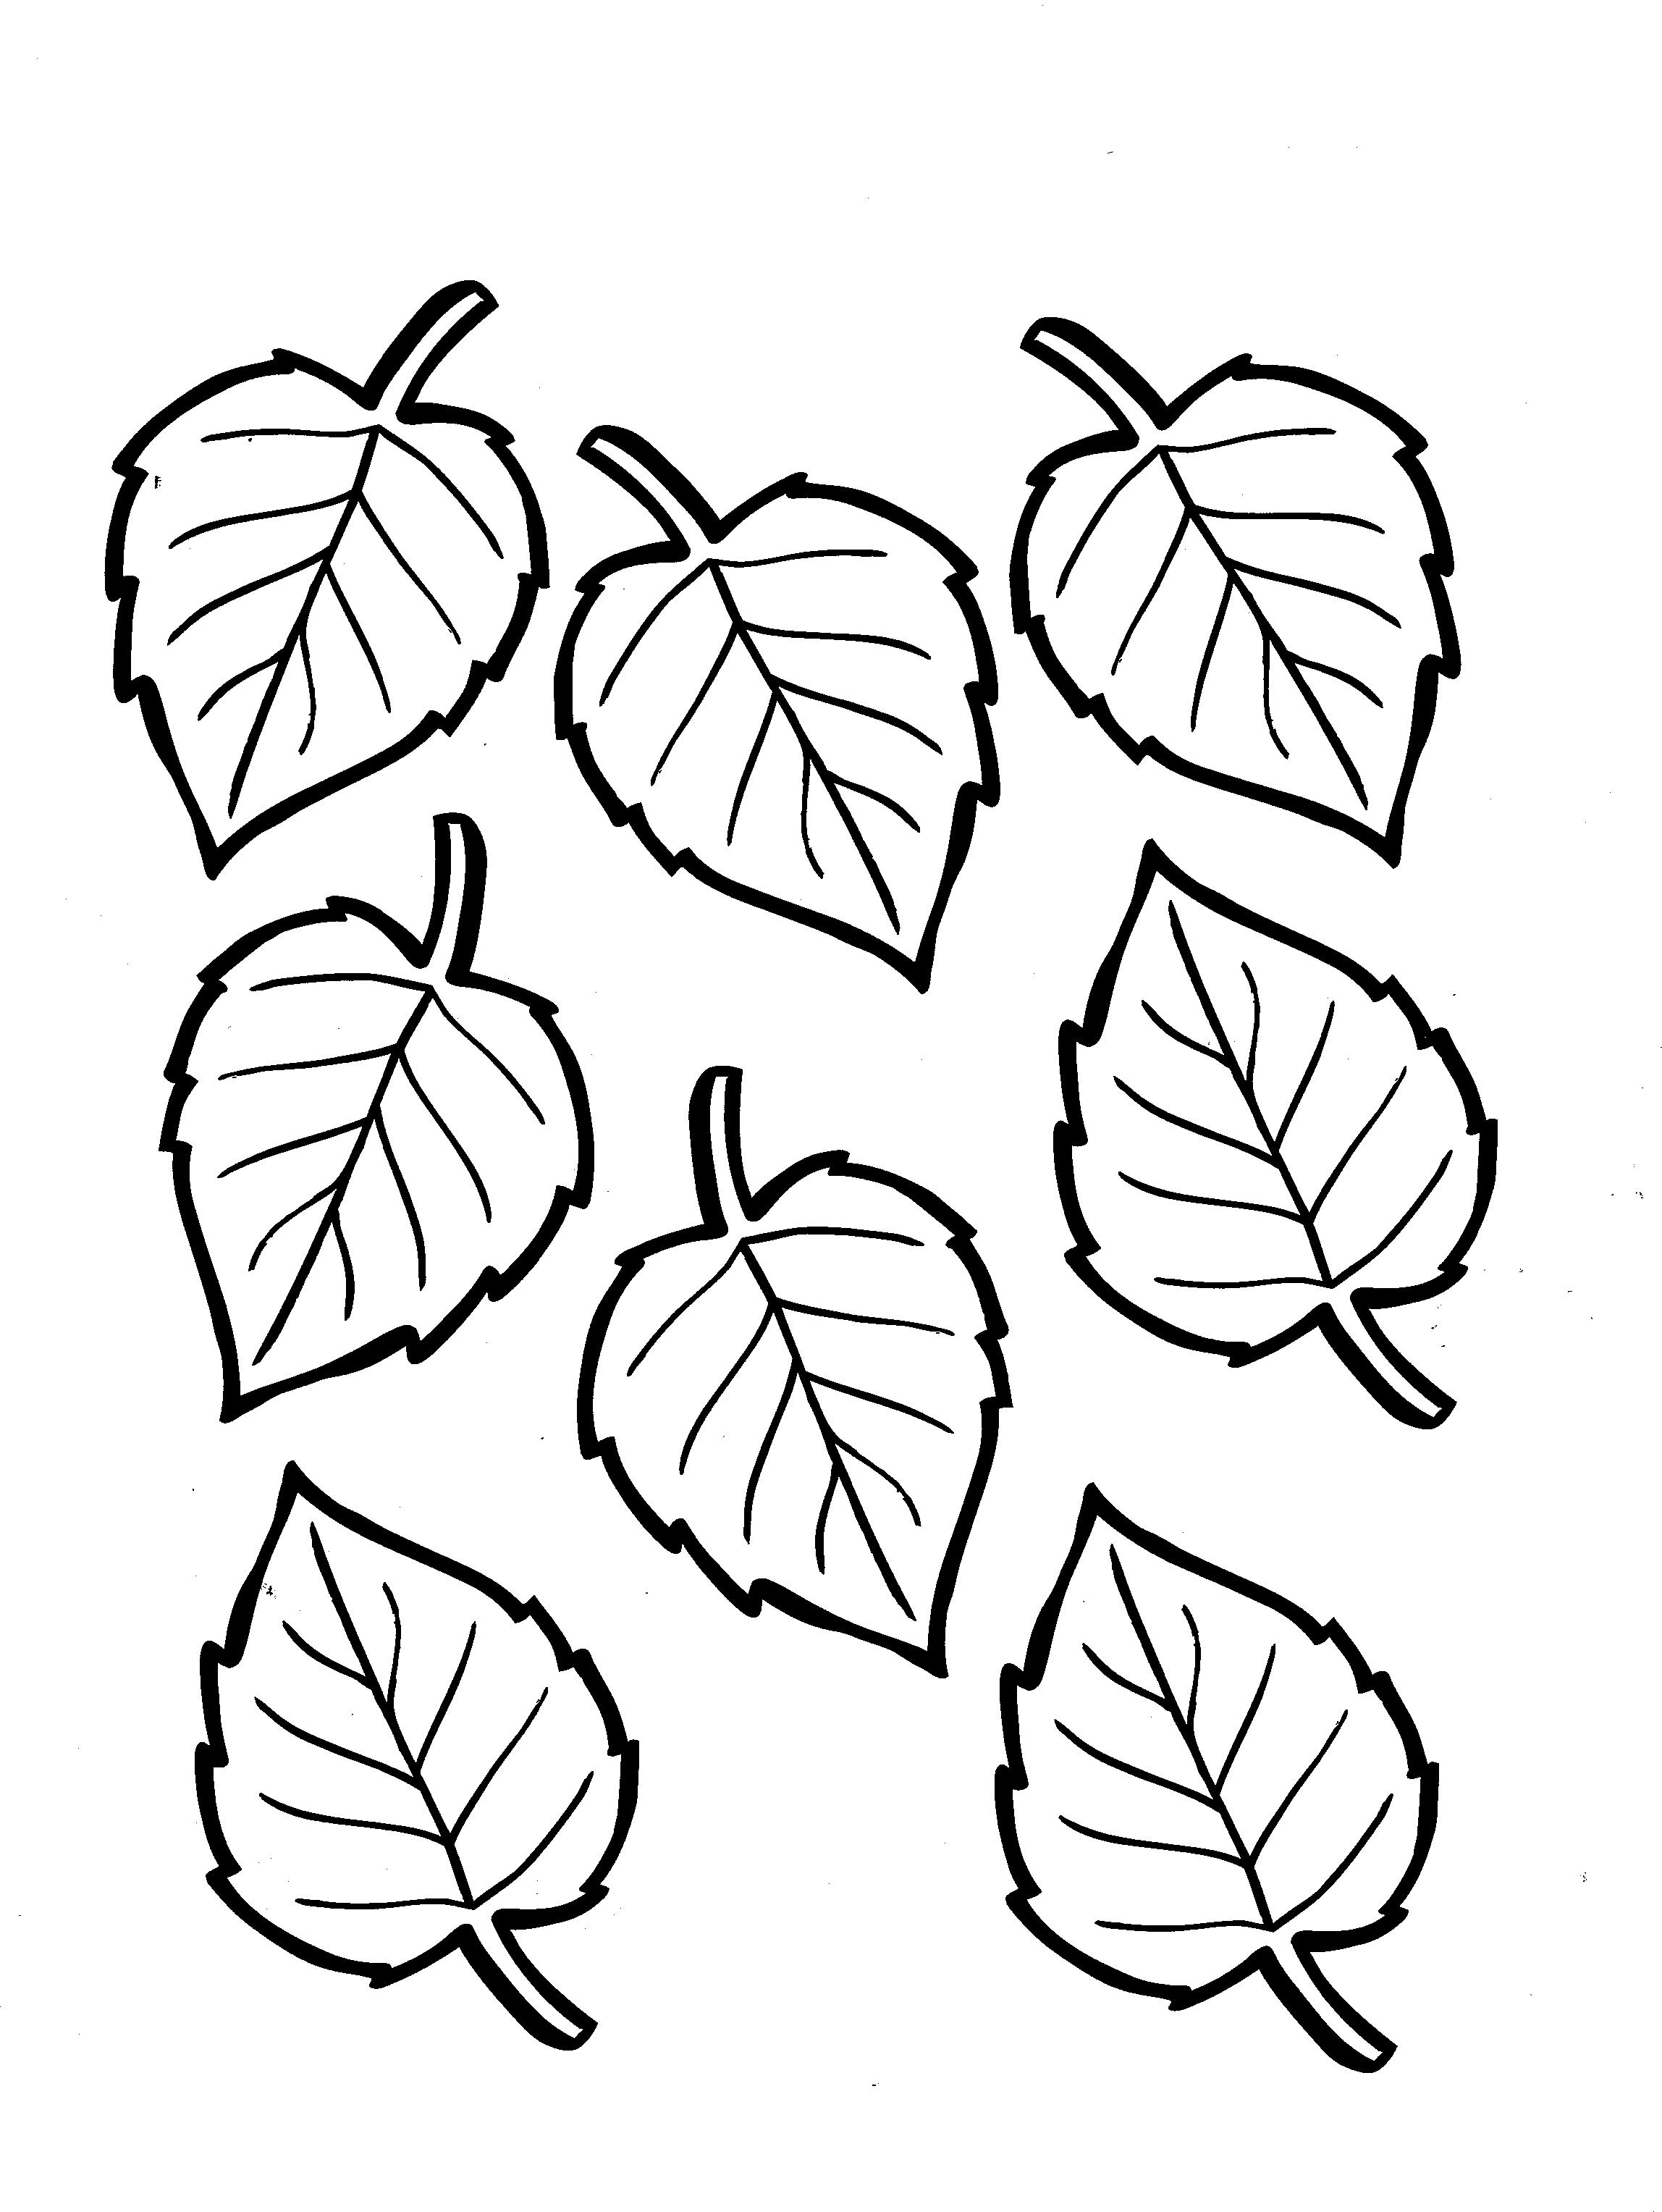 Free Coloring Pages Of Leaves Free Leaf Coloring Pages At Getdrawings Free For Personal Use